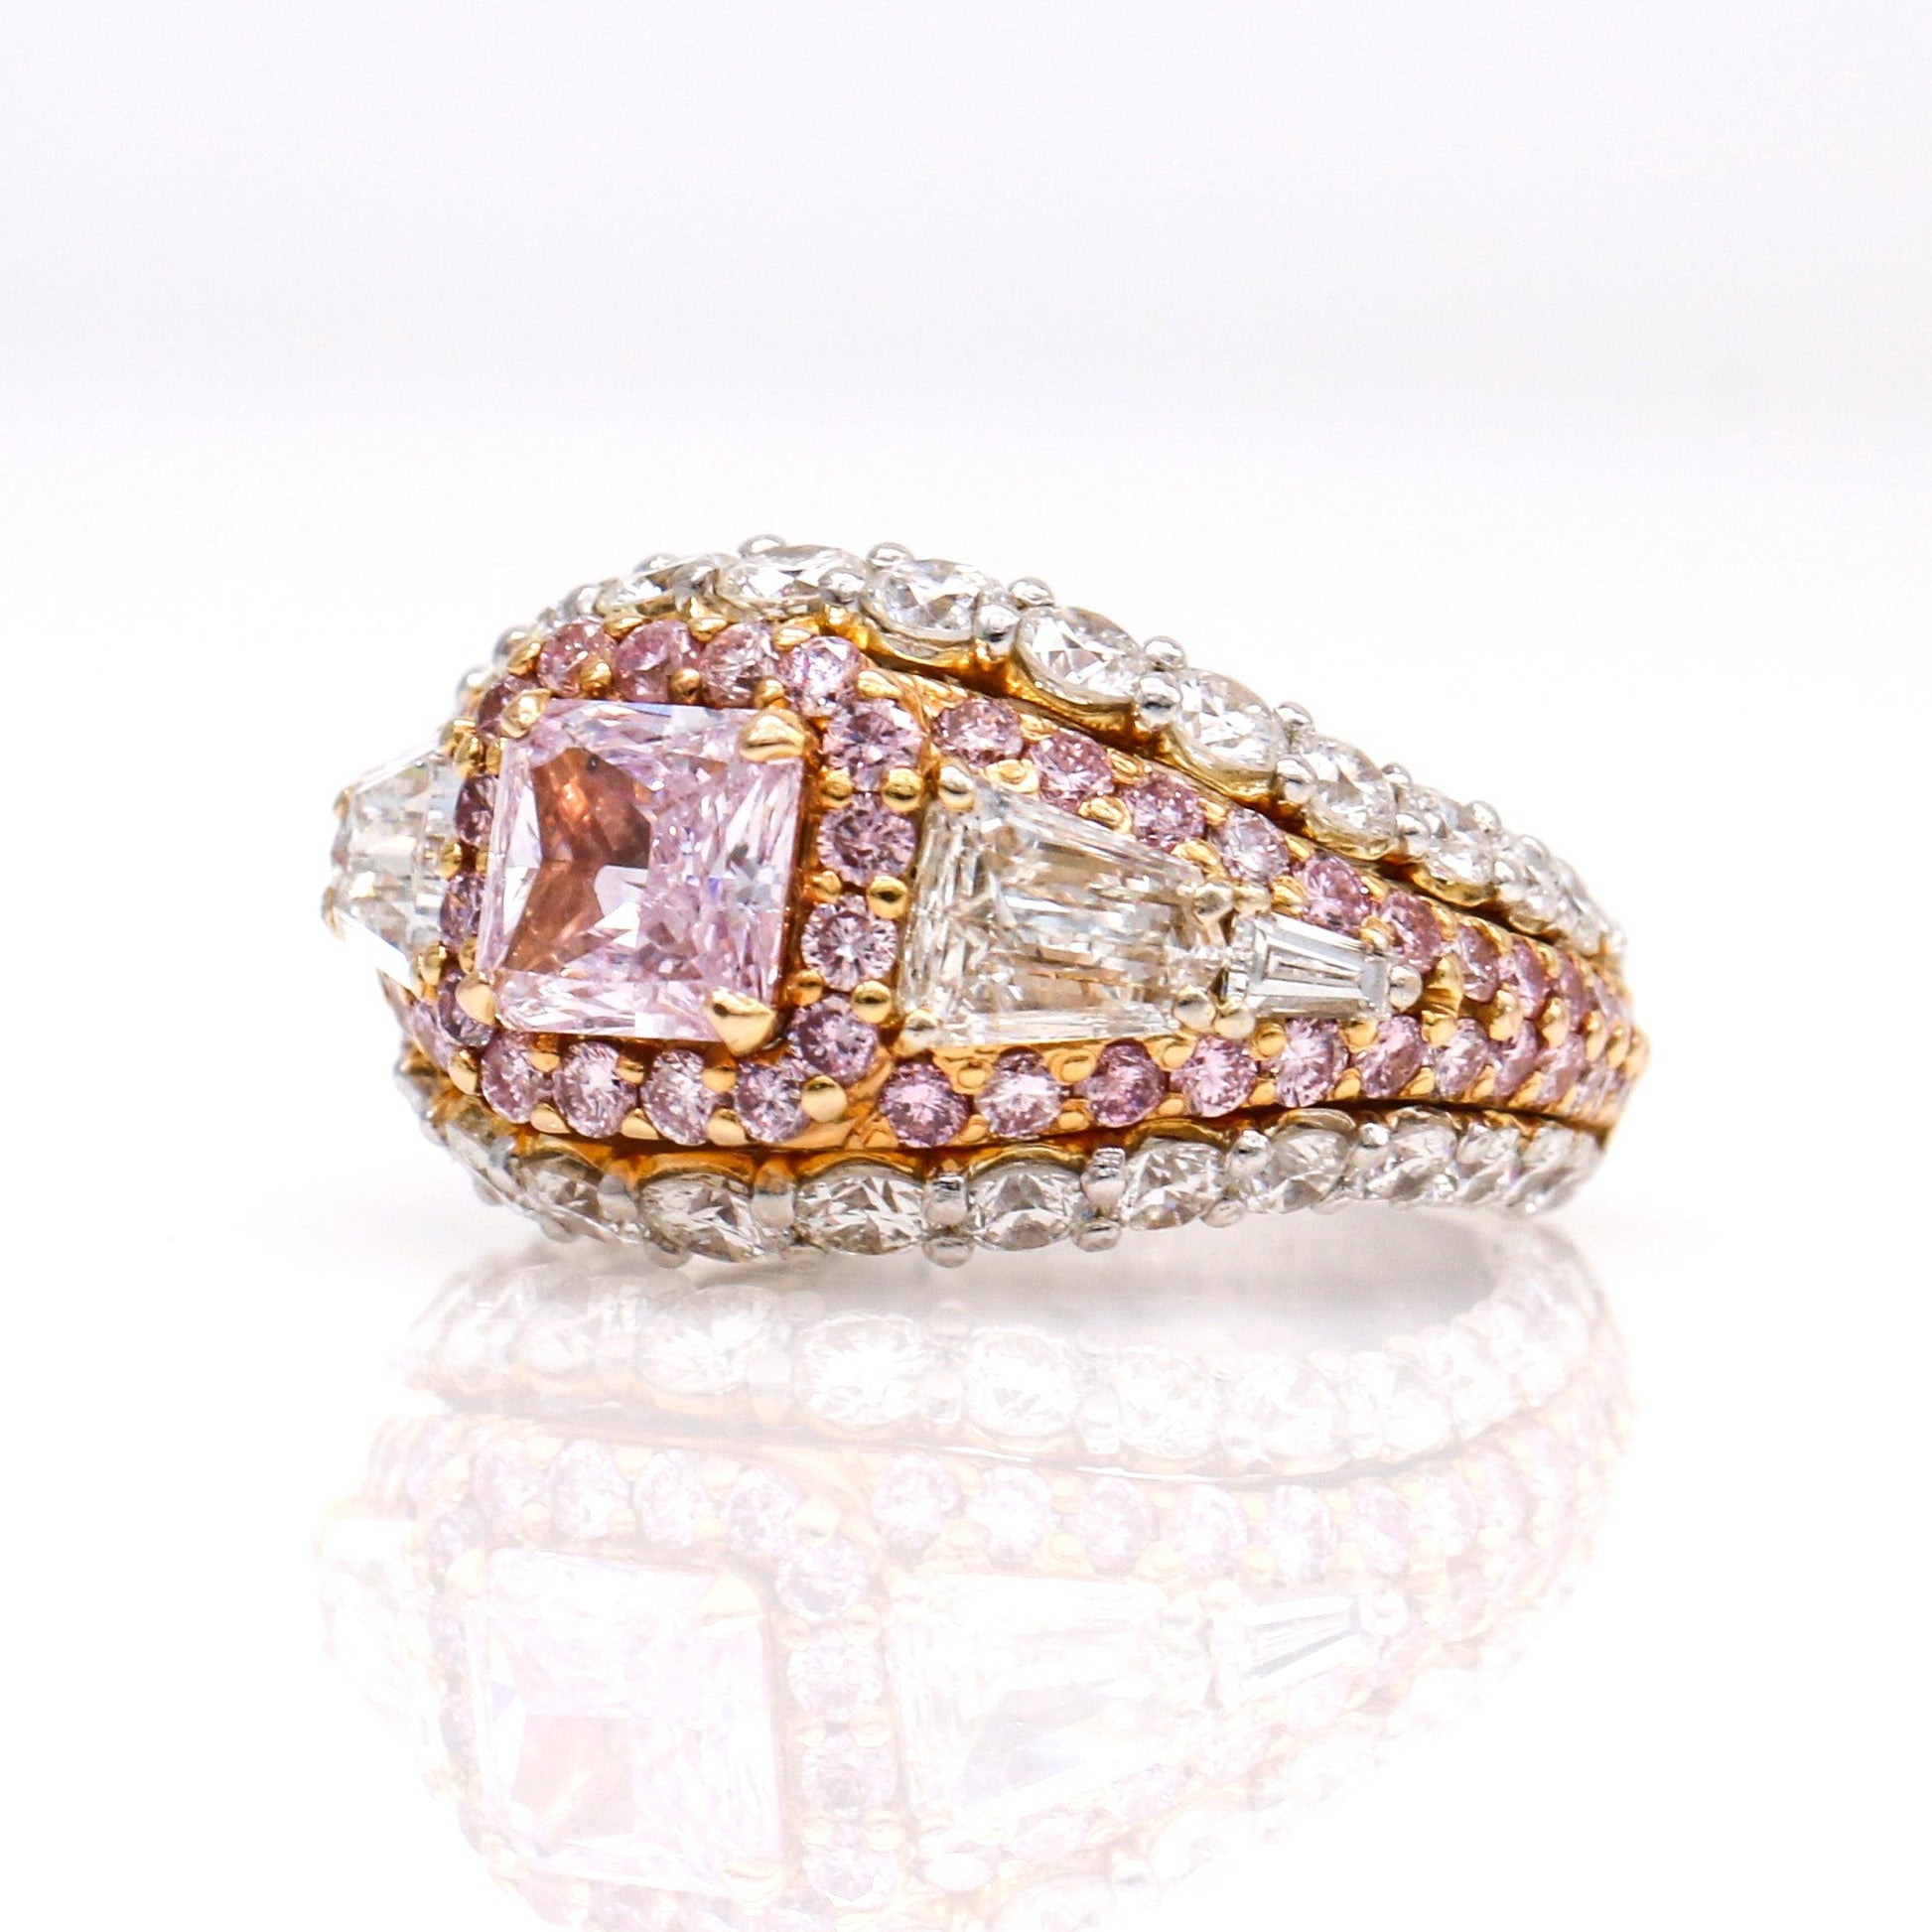 GIA Certified Fancy Pink Diamond Engagement Ring in Platinum and 18k Gold - 31 Jewels Inc.